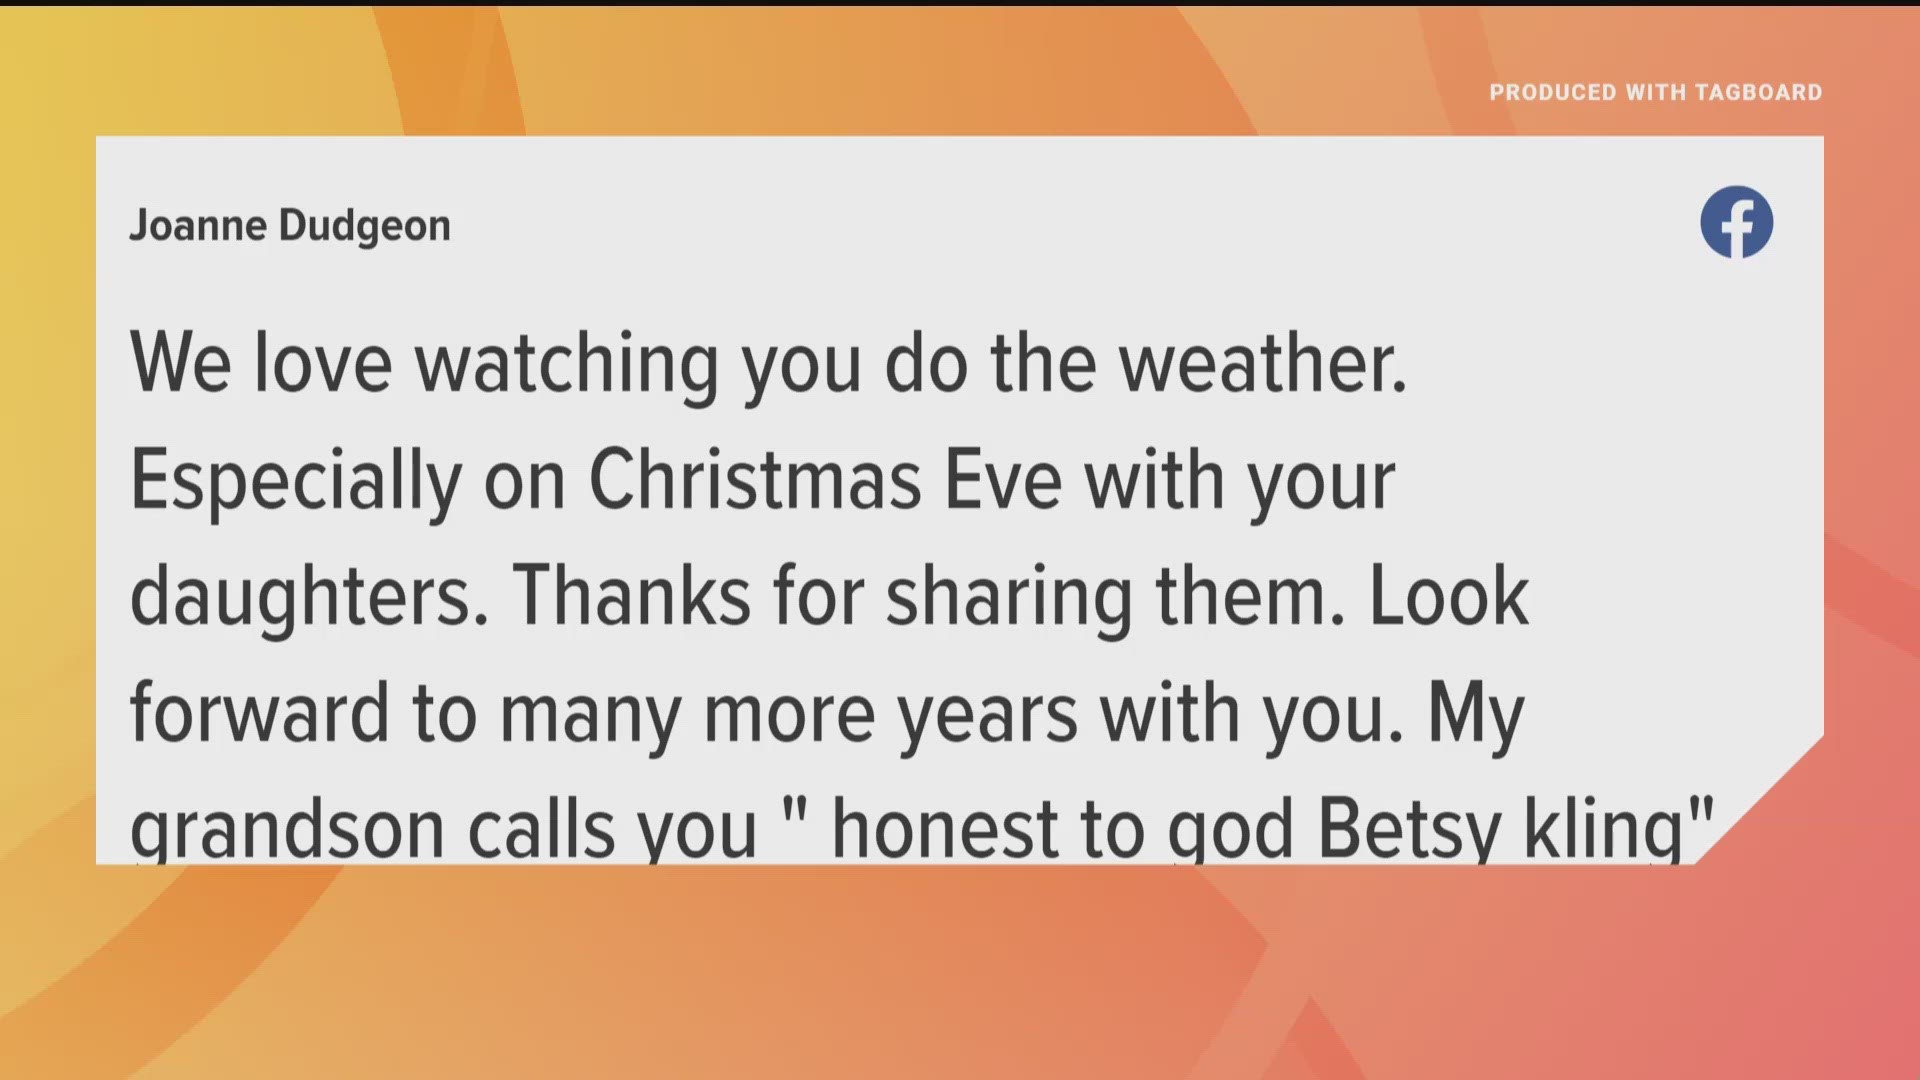 Betsy, a native of Copley, joined our team at 3News in 2003. In the two decades since, she has made her mark not just on TV, but in the community she loves.